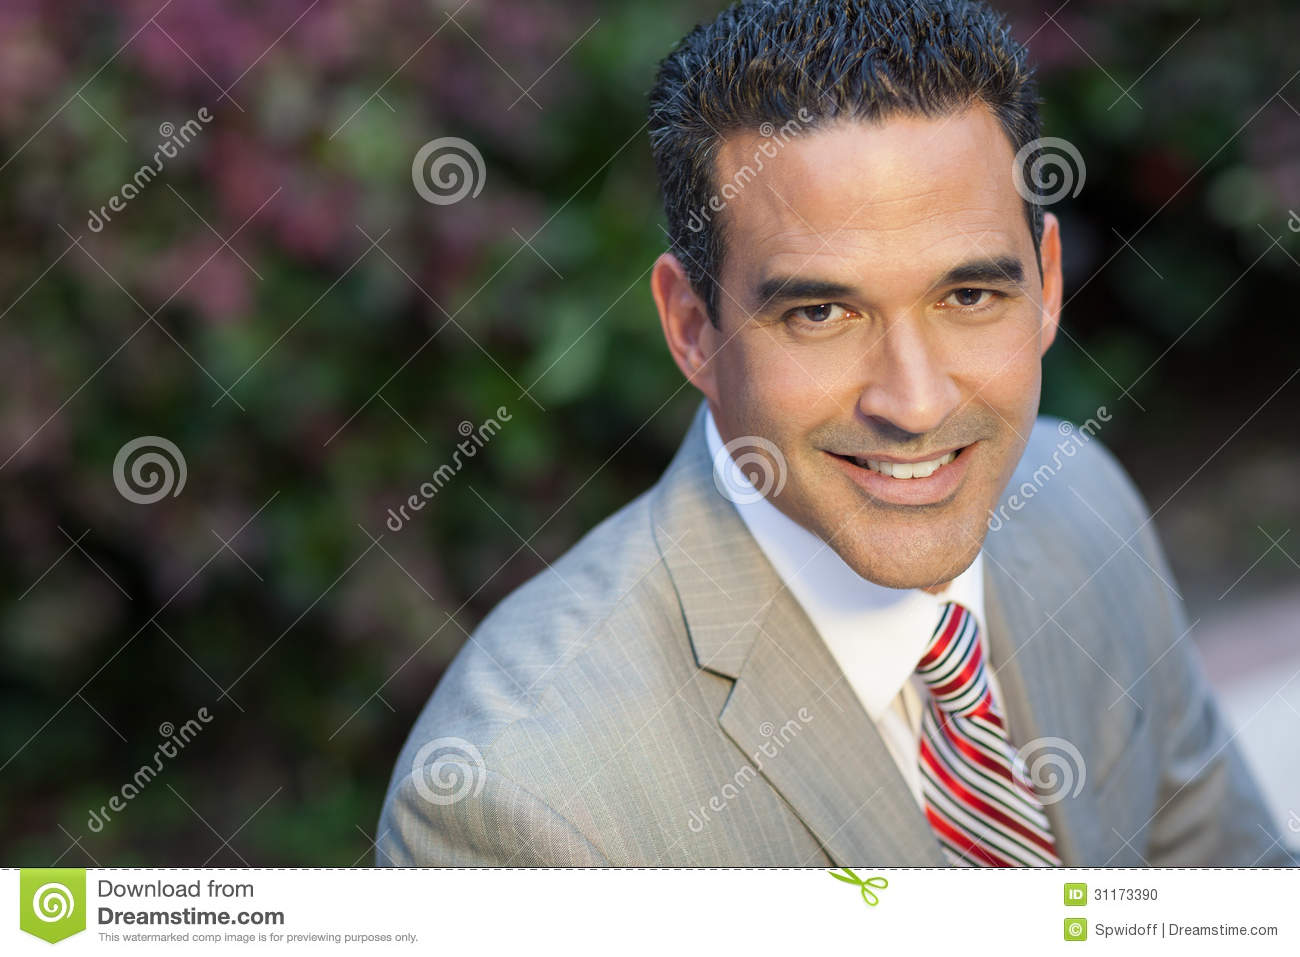 Handsome Brunette Hispanic Man Smiling At The Camera Outside In Suit